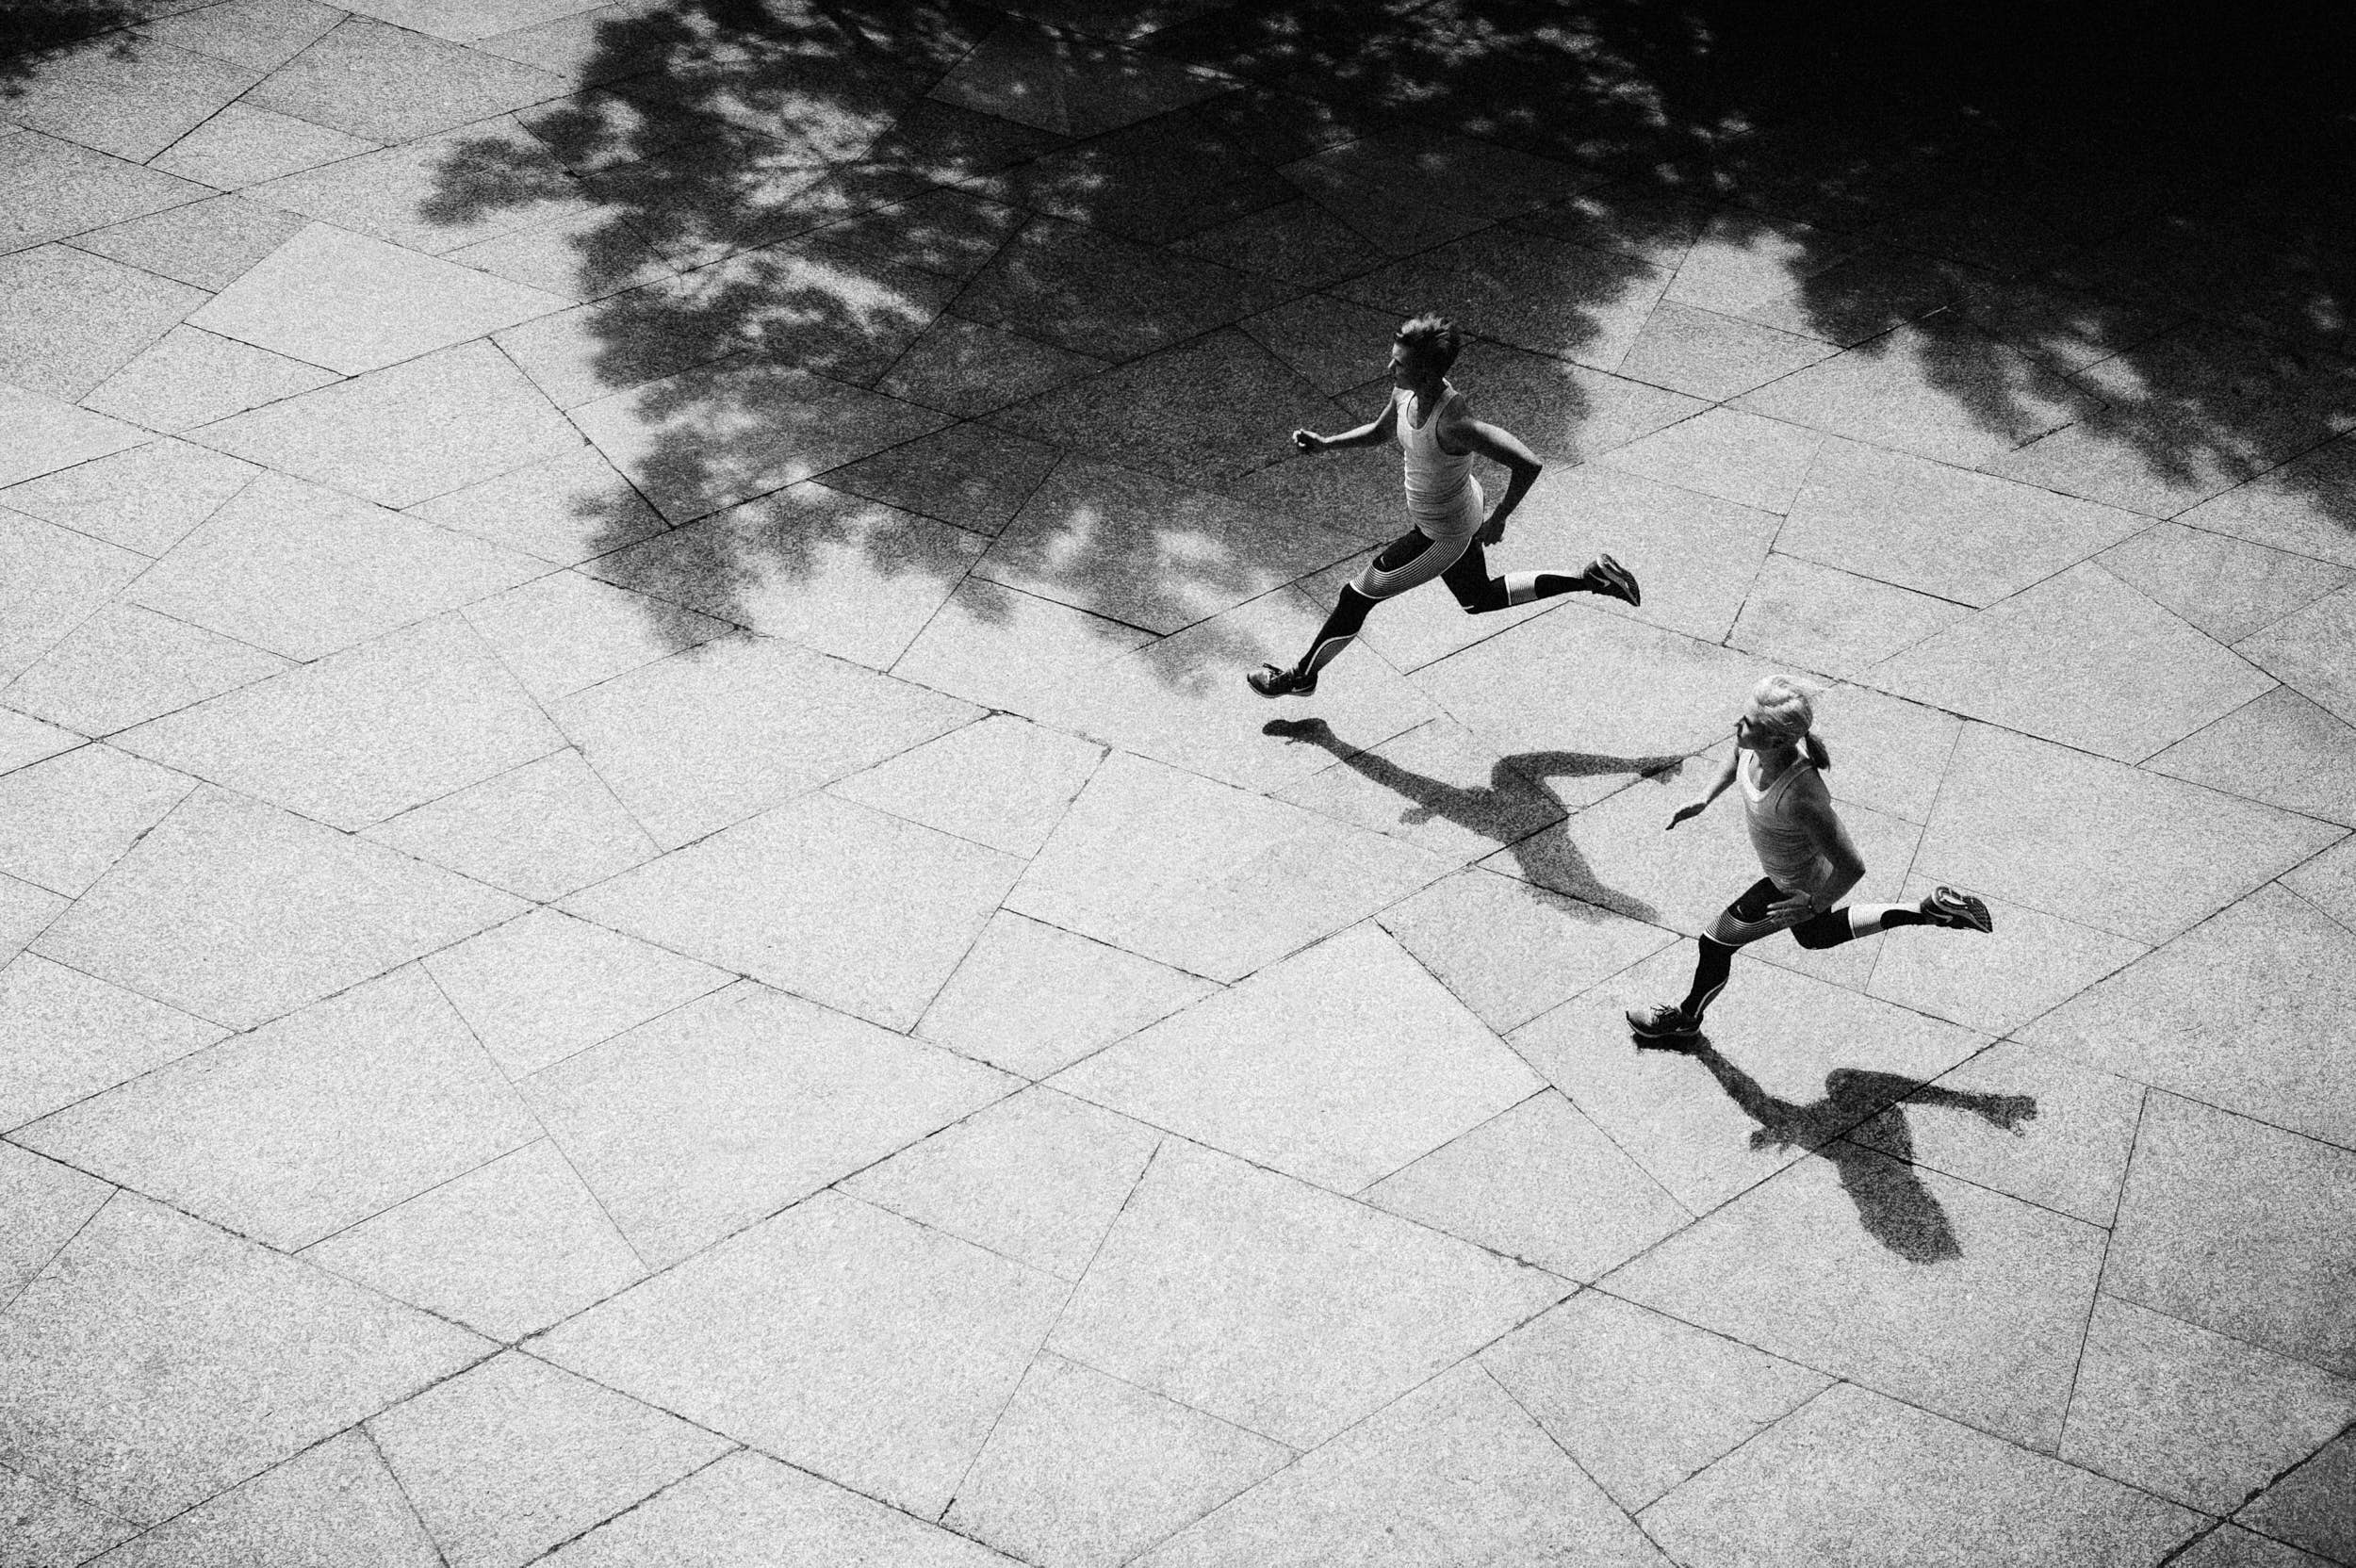 Black and white sport photography: two girls running on marble pavement shot from elevated perspective with strong contrast.